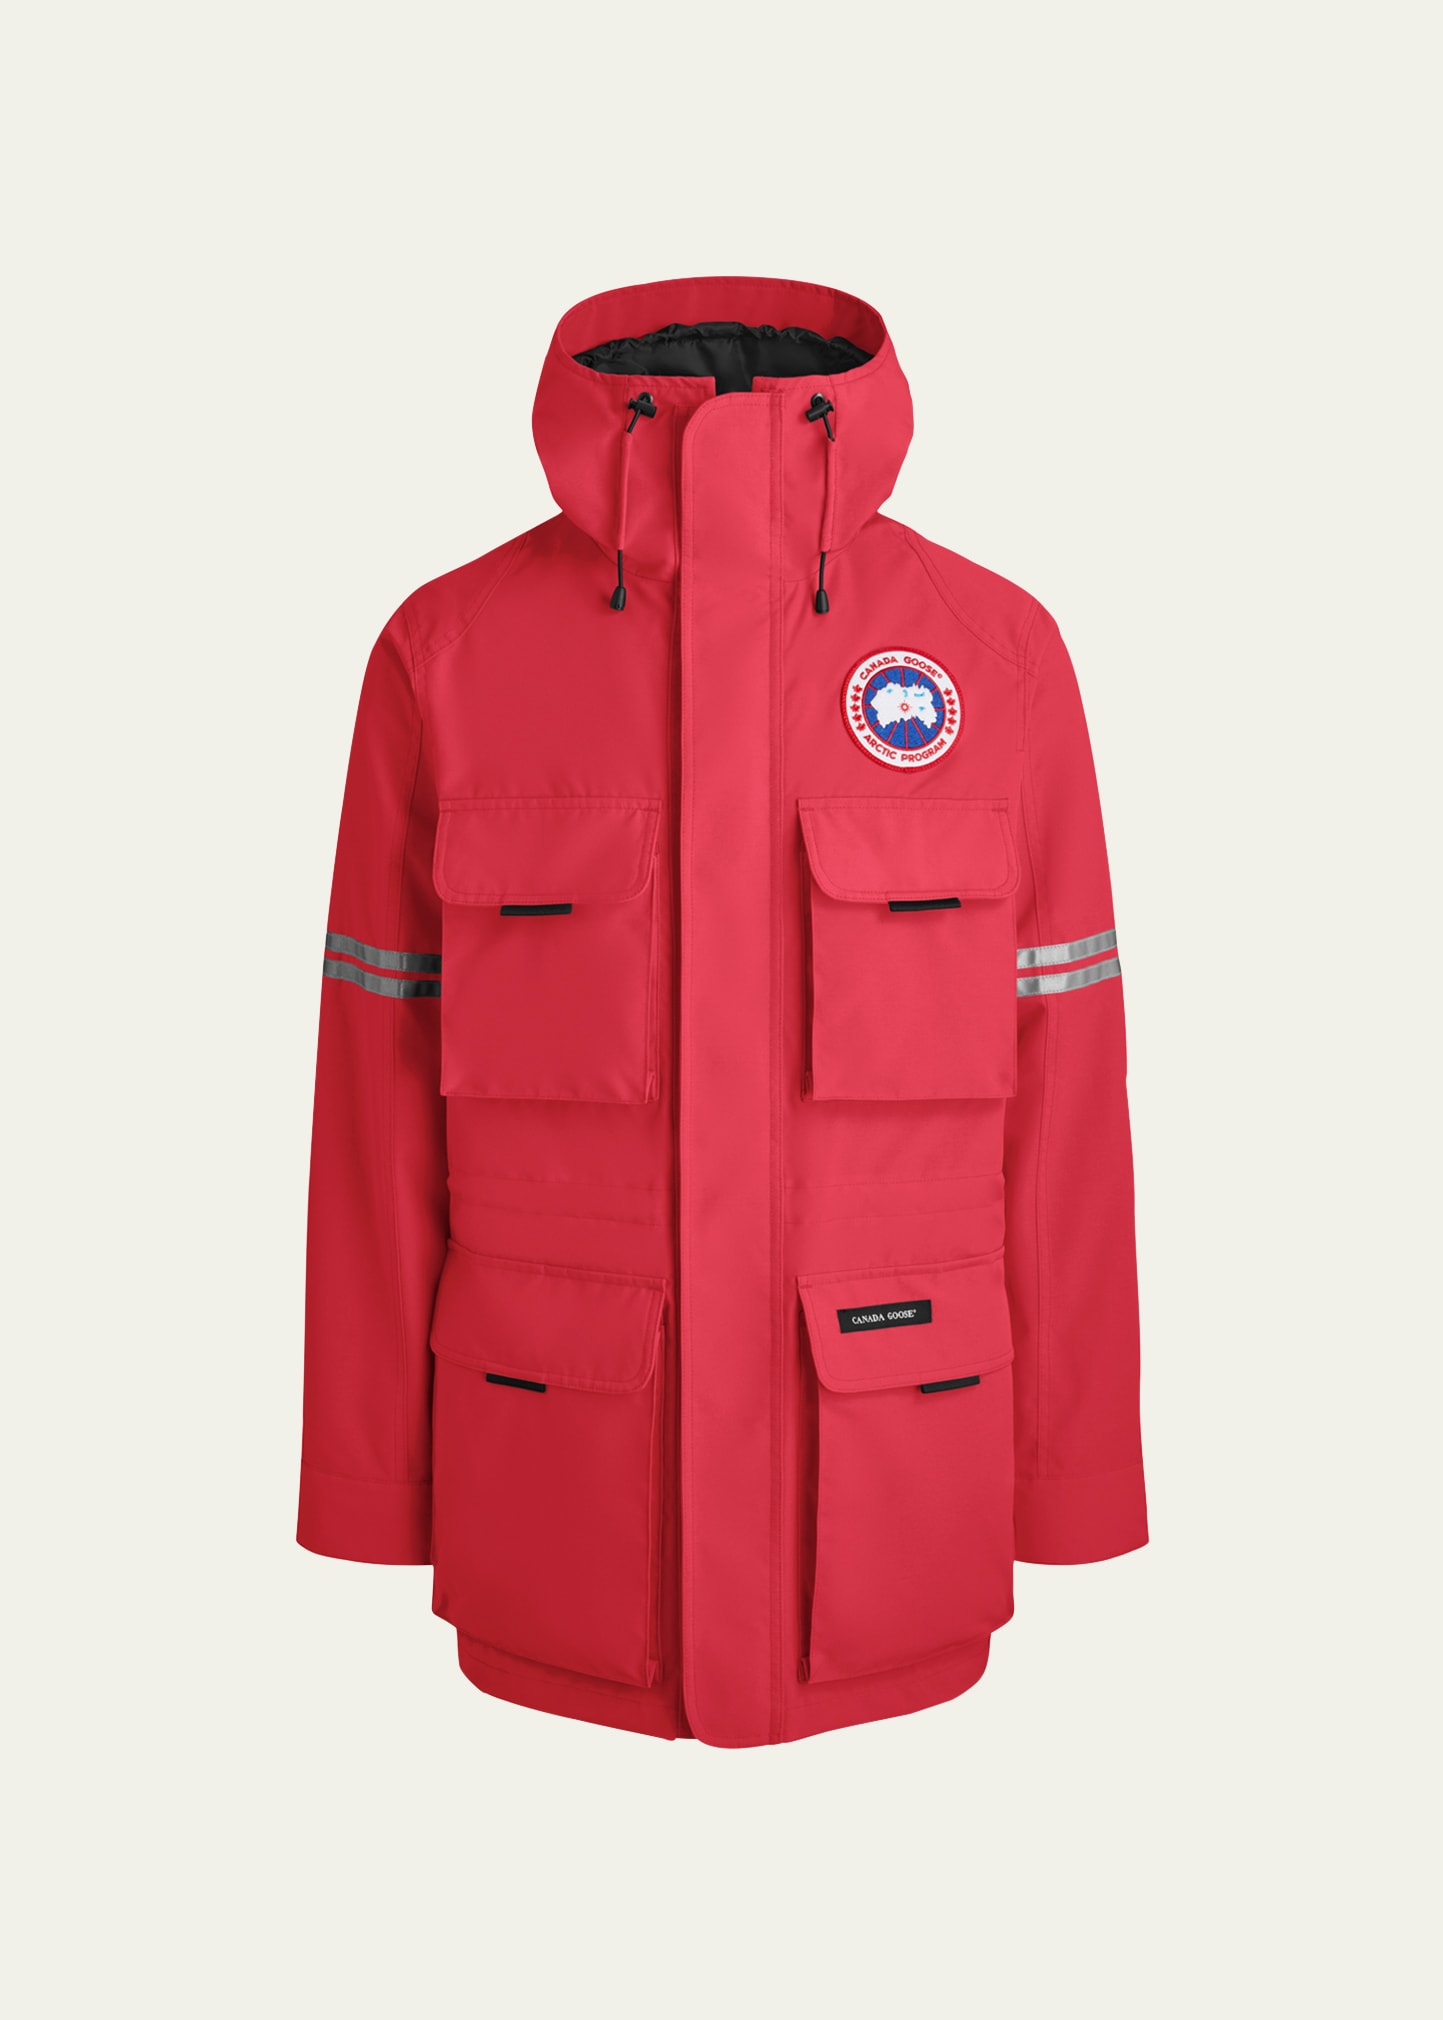 Canada Goose Men's Science Research Jacket In Red